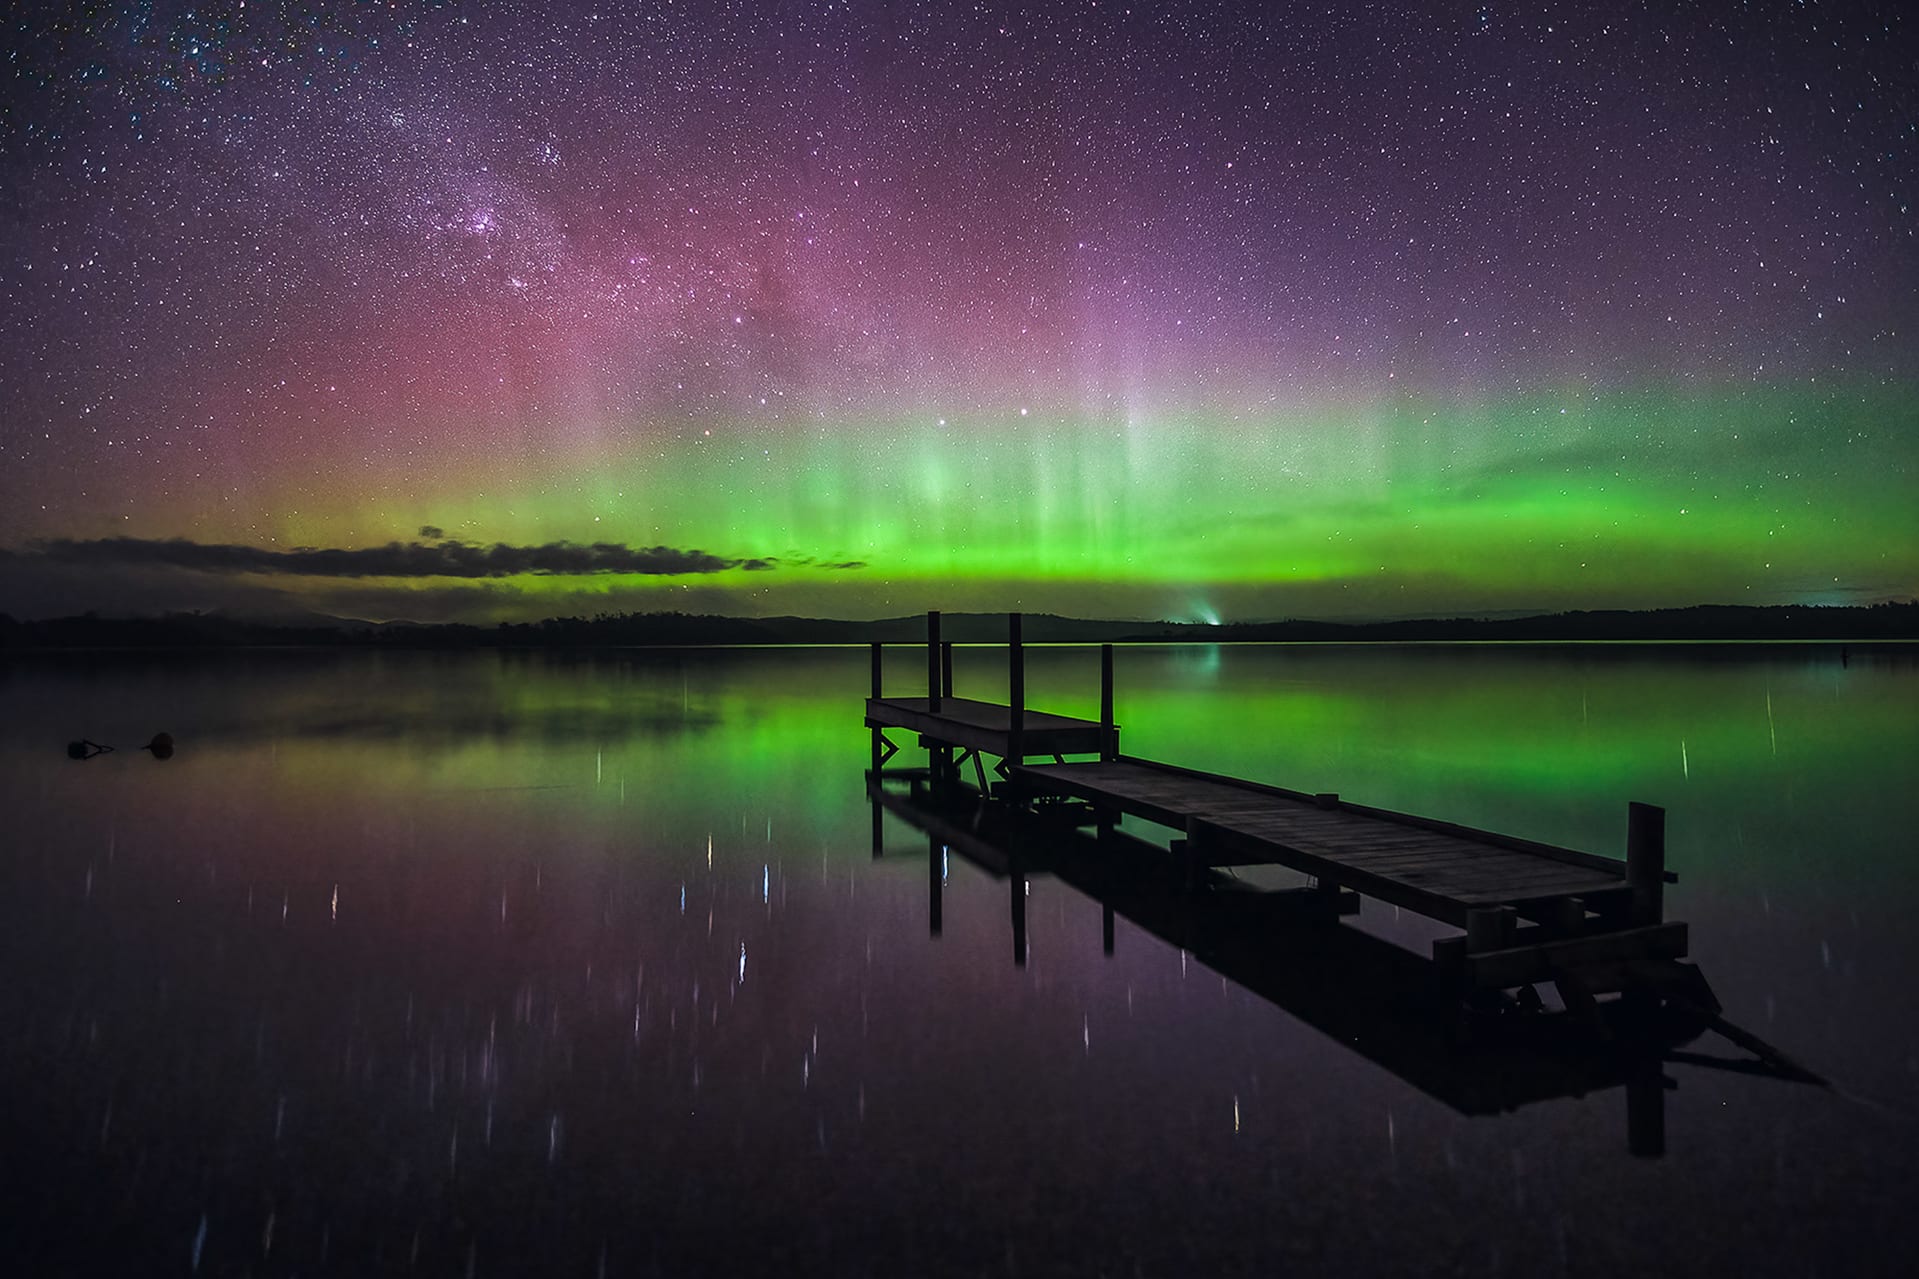 Aurora Australis to be visible in Australia tonight - where you can see it